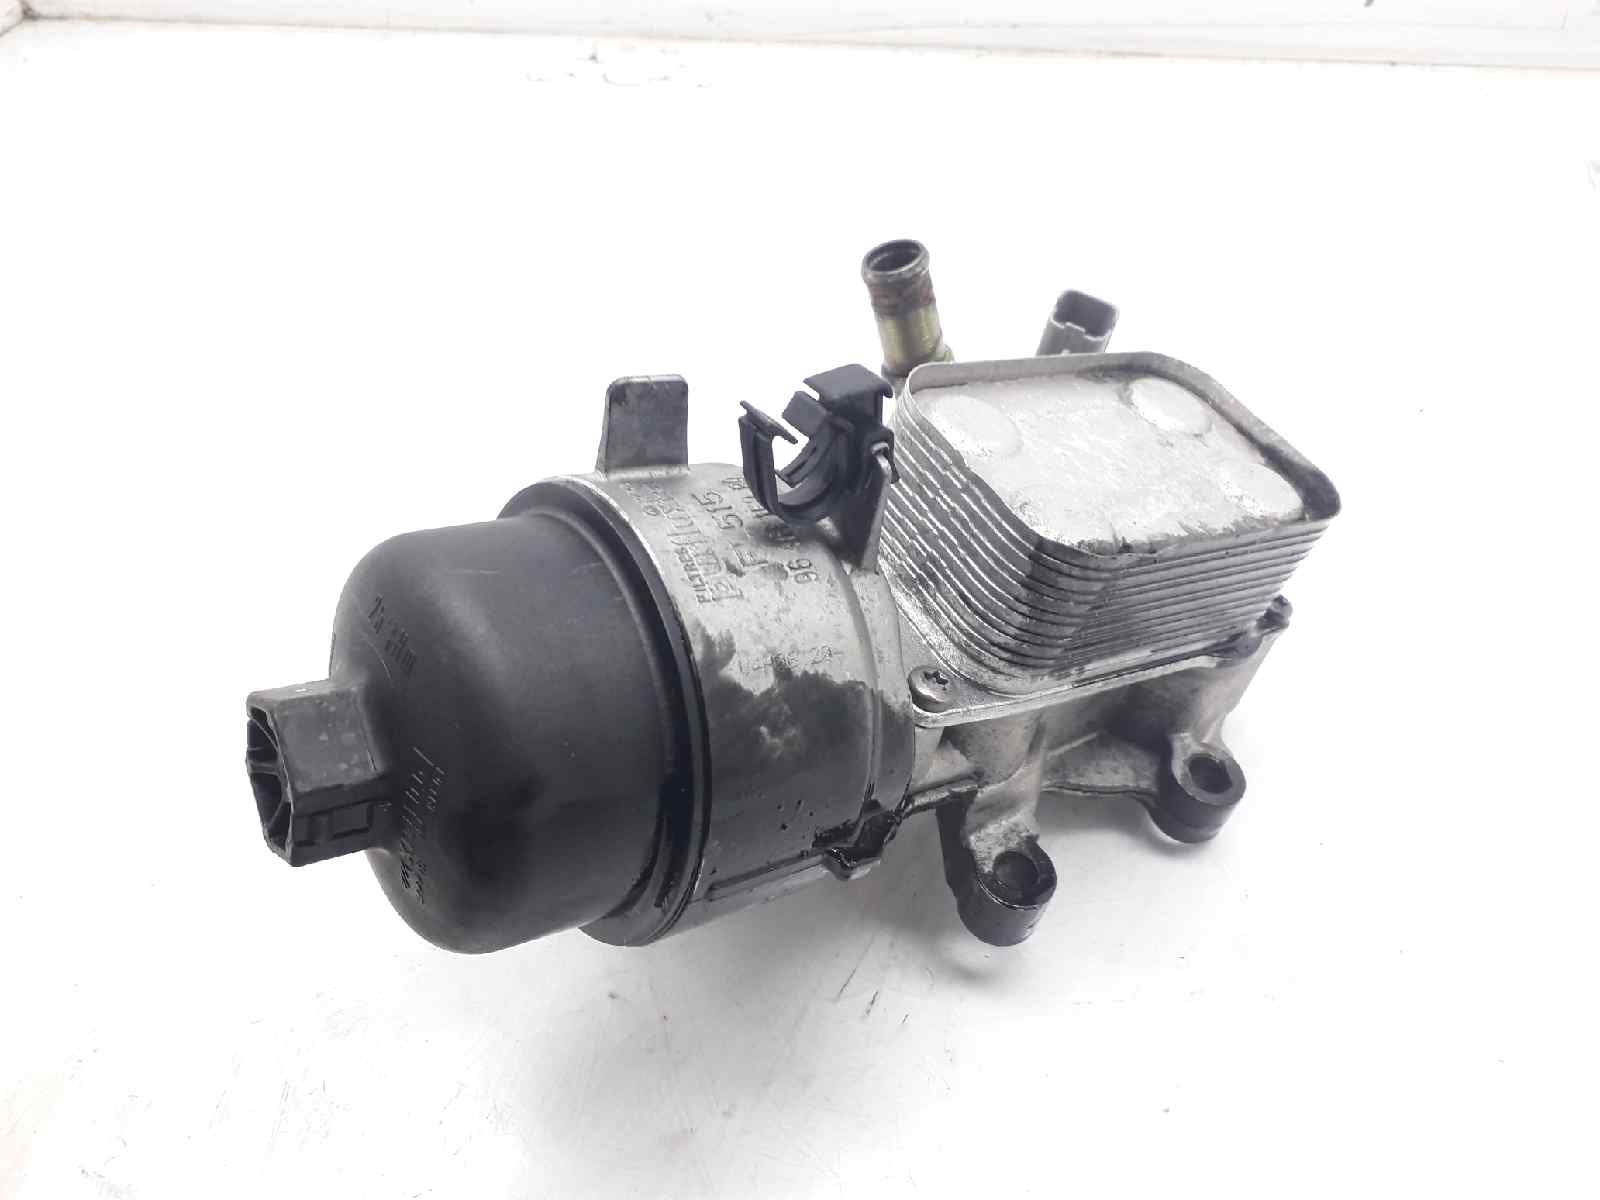 PEUGEOT 407 1 generation (2004-2010) Other Engine Compartment Parts 9646115280 20183688